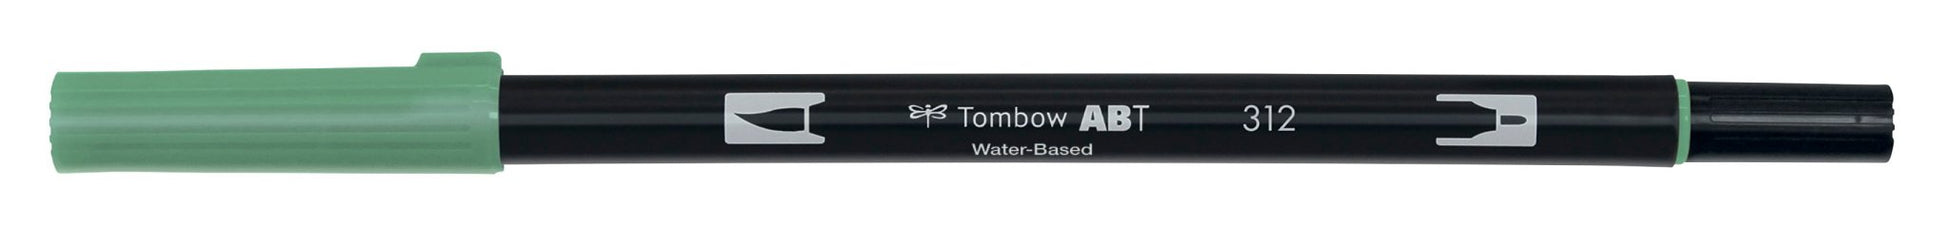 Tombow ABT dual brush pen - single colours - Tombow - Holly green ABT-312 - millenotes